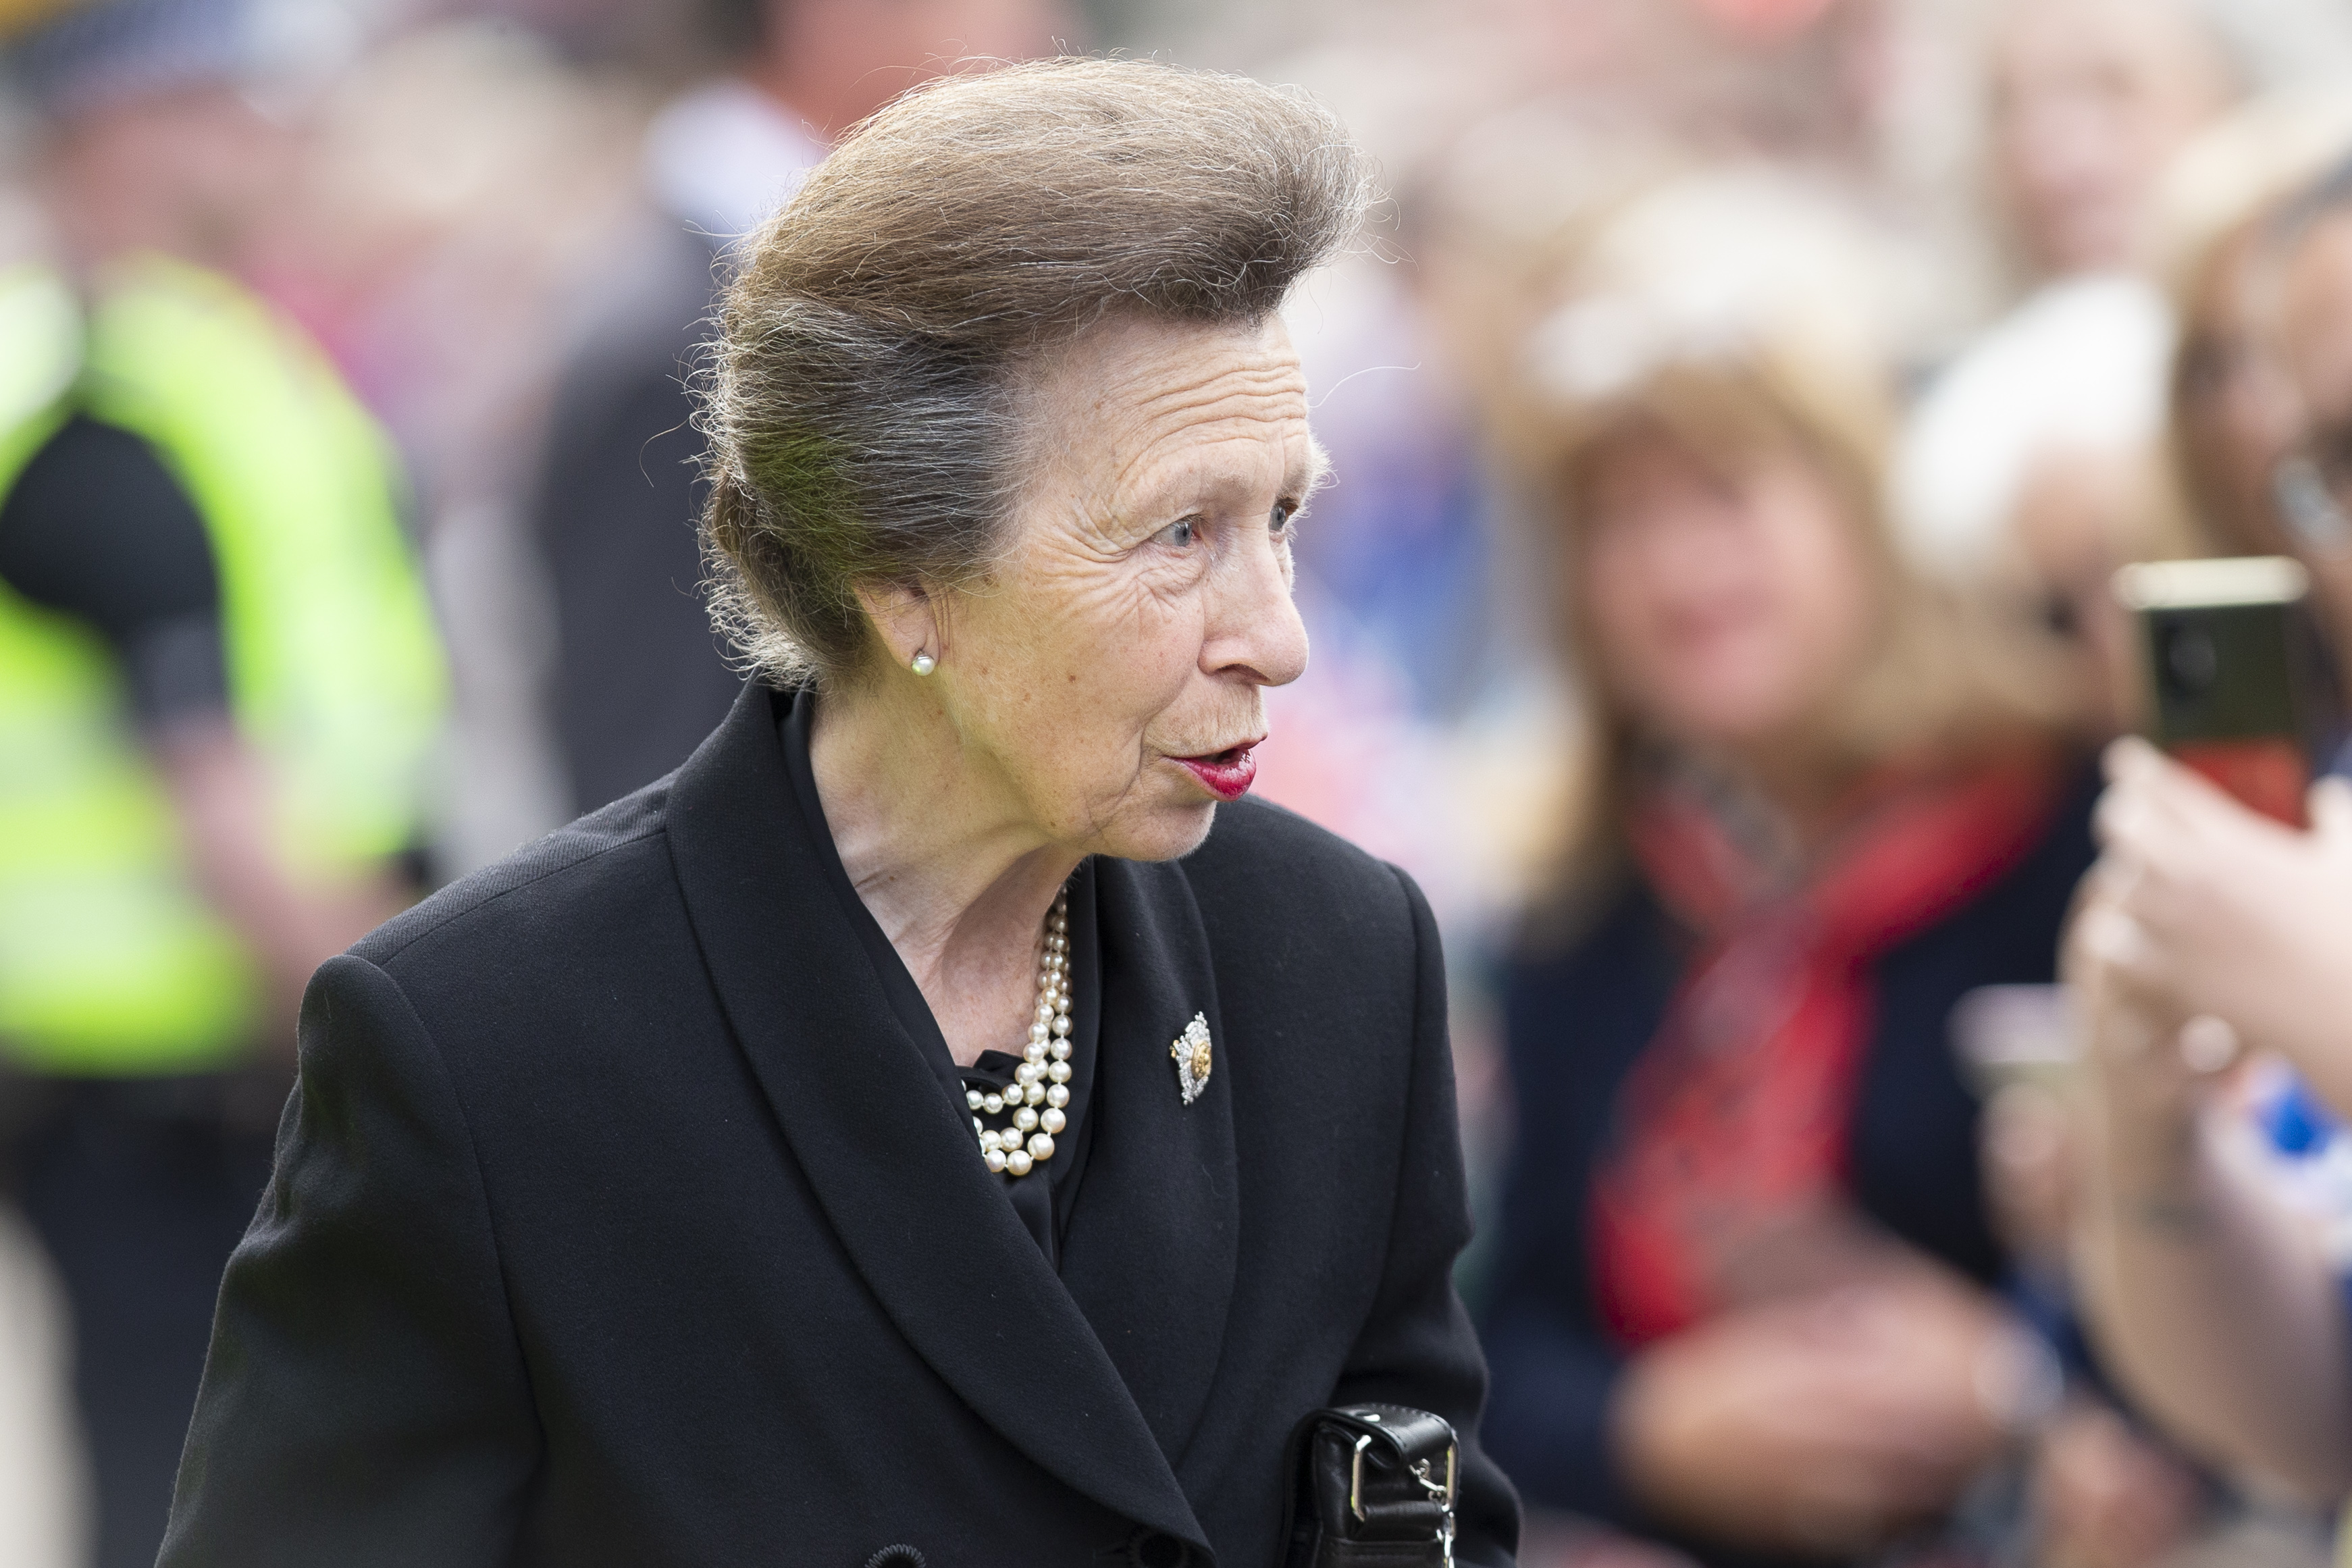 <p>Princess Anne greeted members of the public and viewed tributes laid outside City Chambers in Glasgow, Scotland, on Sept. 15, 2022, after meeting representatives of organizations of which her late mother, Queen Elizabeth II, was patron, in the run-up to the monarch's funeral. She and other senior royals stepped in to support her brother King Charles III as he retreated to his Highgrove estate to spend a day in quiet reflection after a packed schedule of events following their mother's death on Sept. 8.</p>